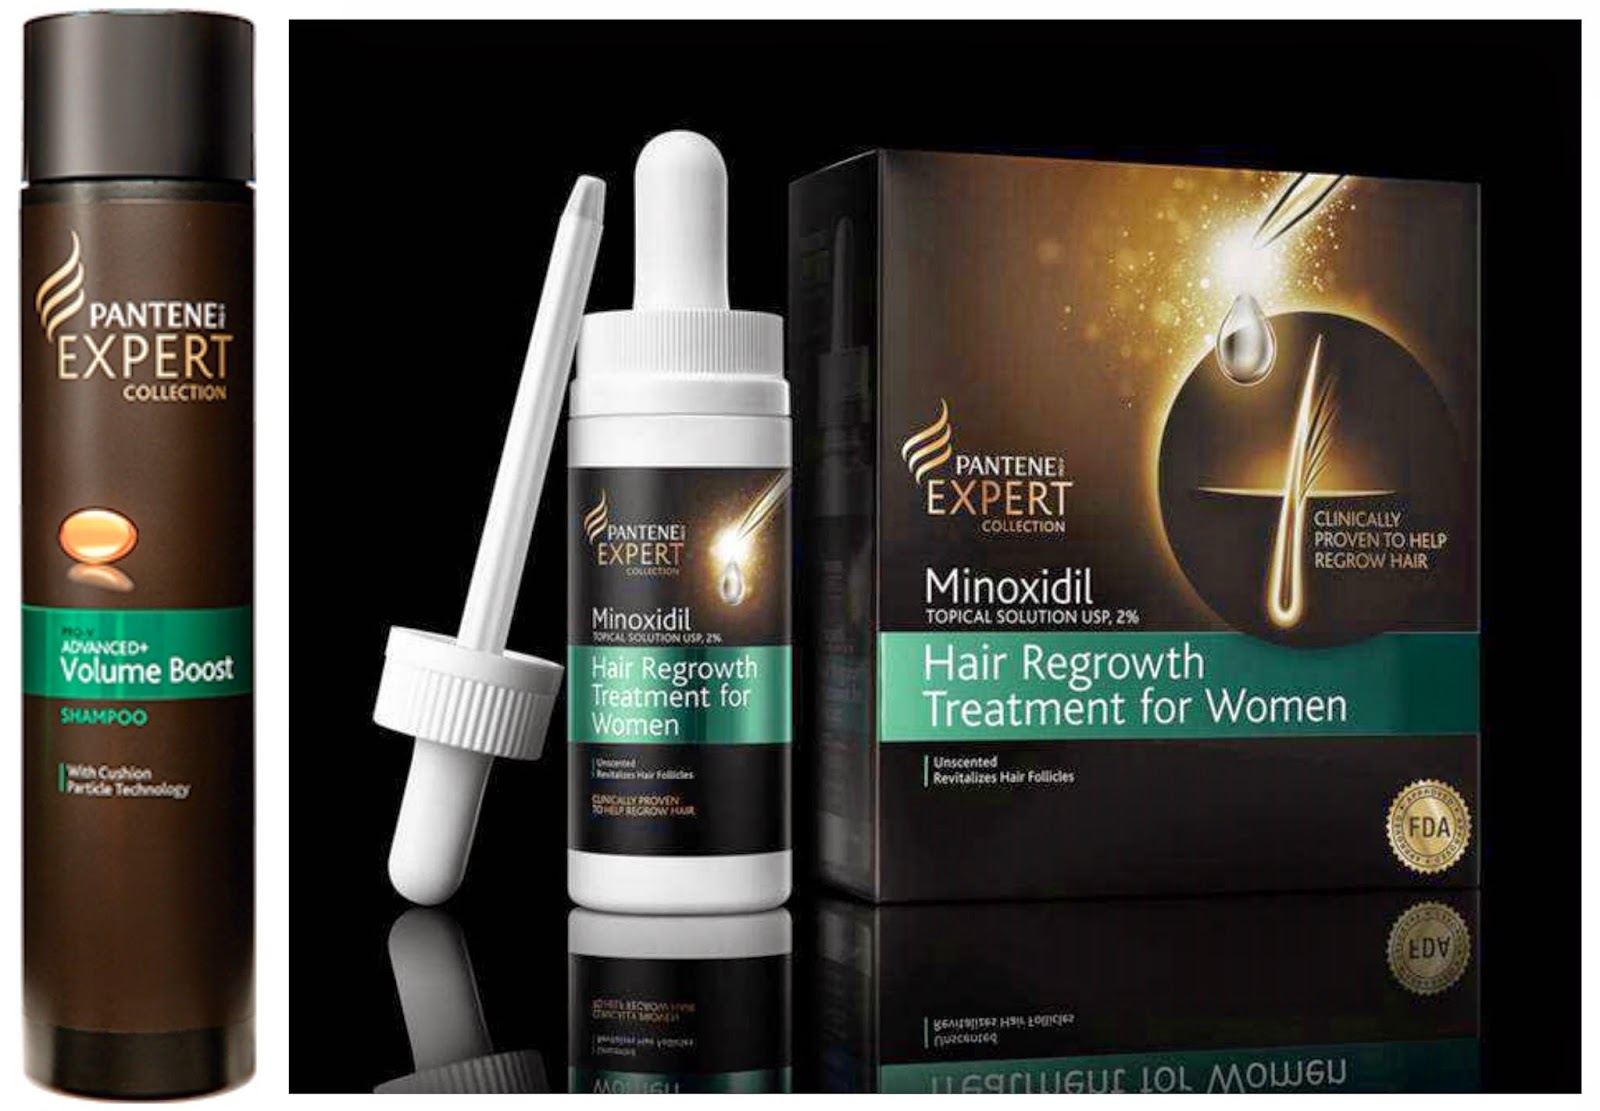 New Product Alert Pantene Launches Expert Collection Hair